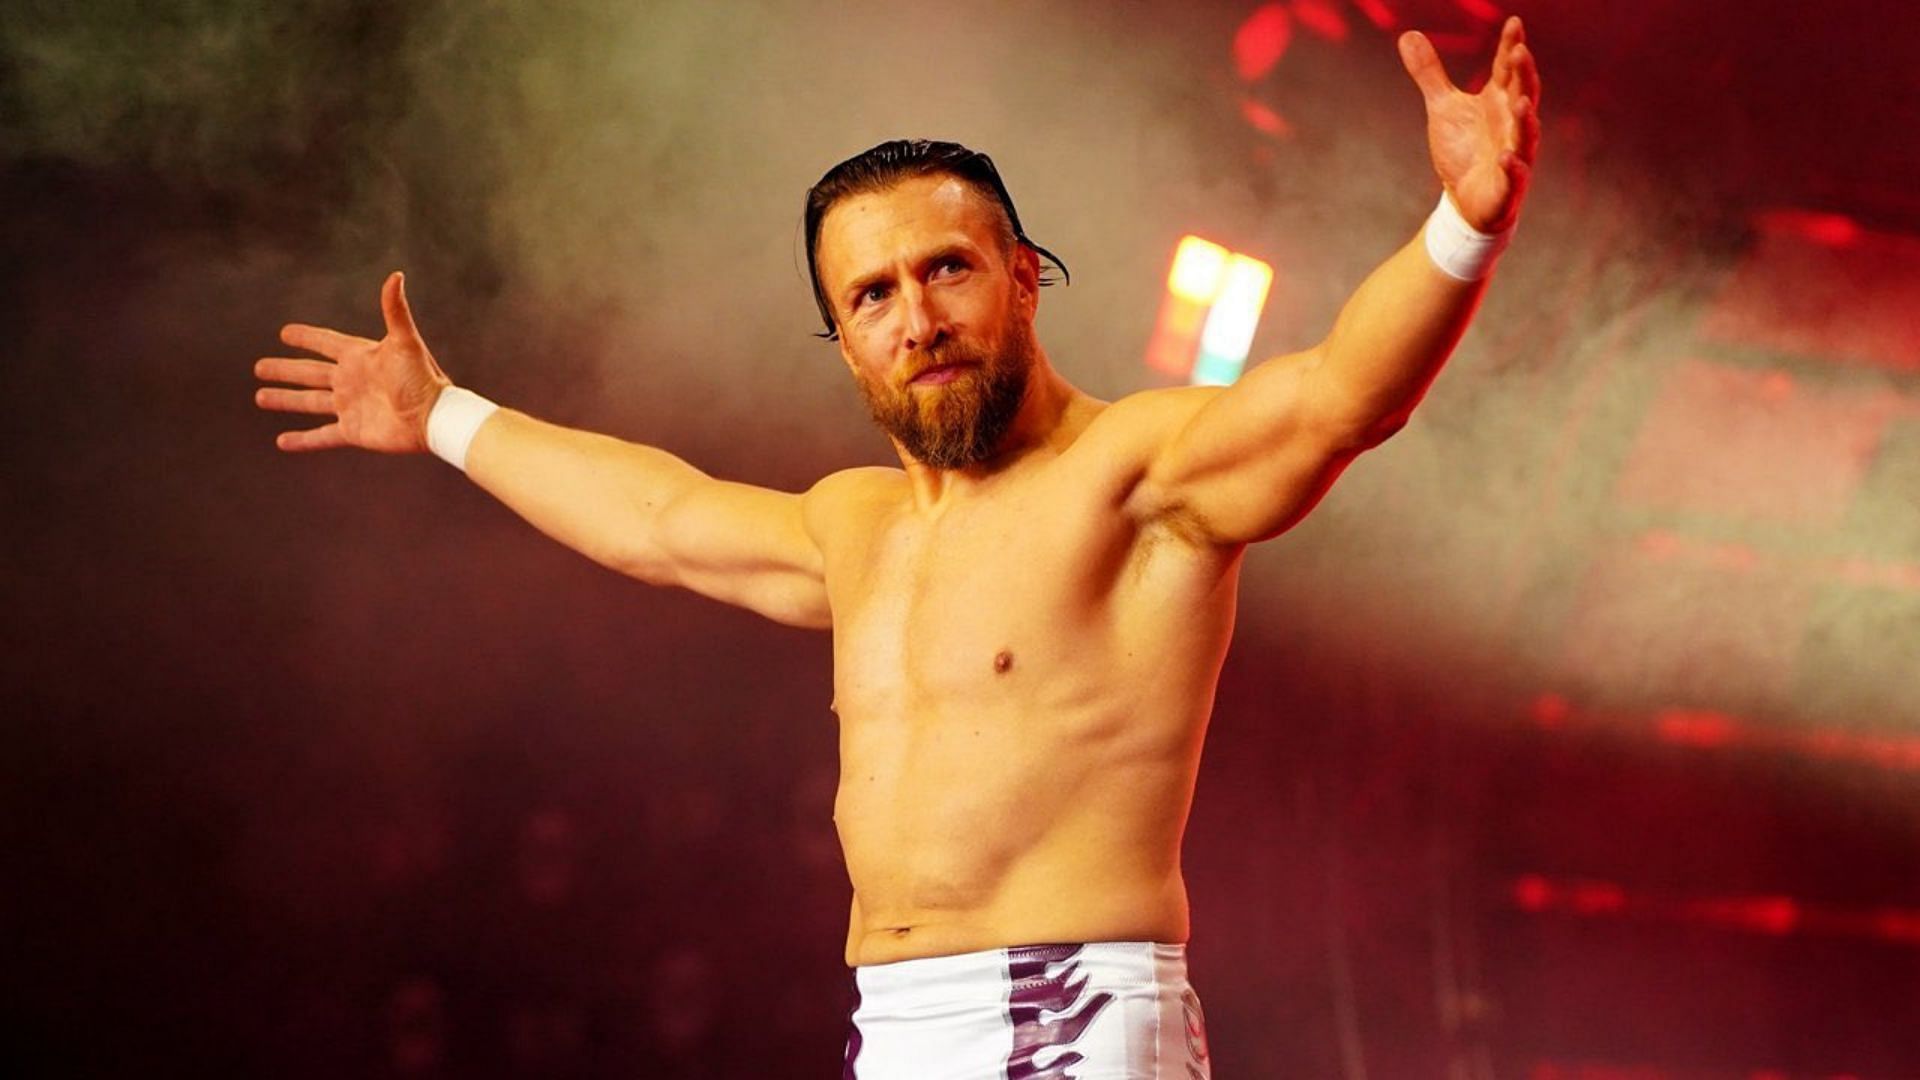 Bryan Danielson at an AEW event in 2022